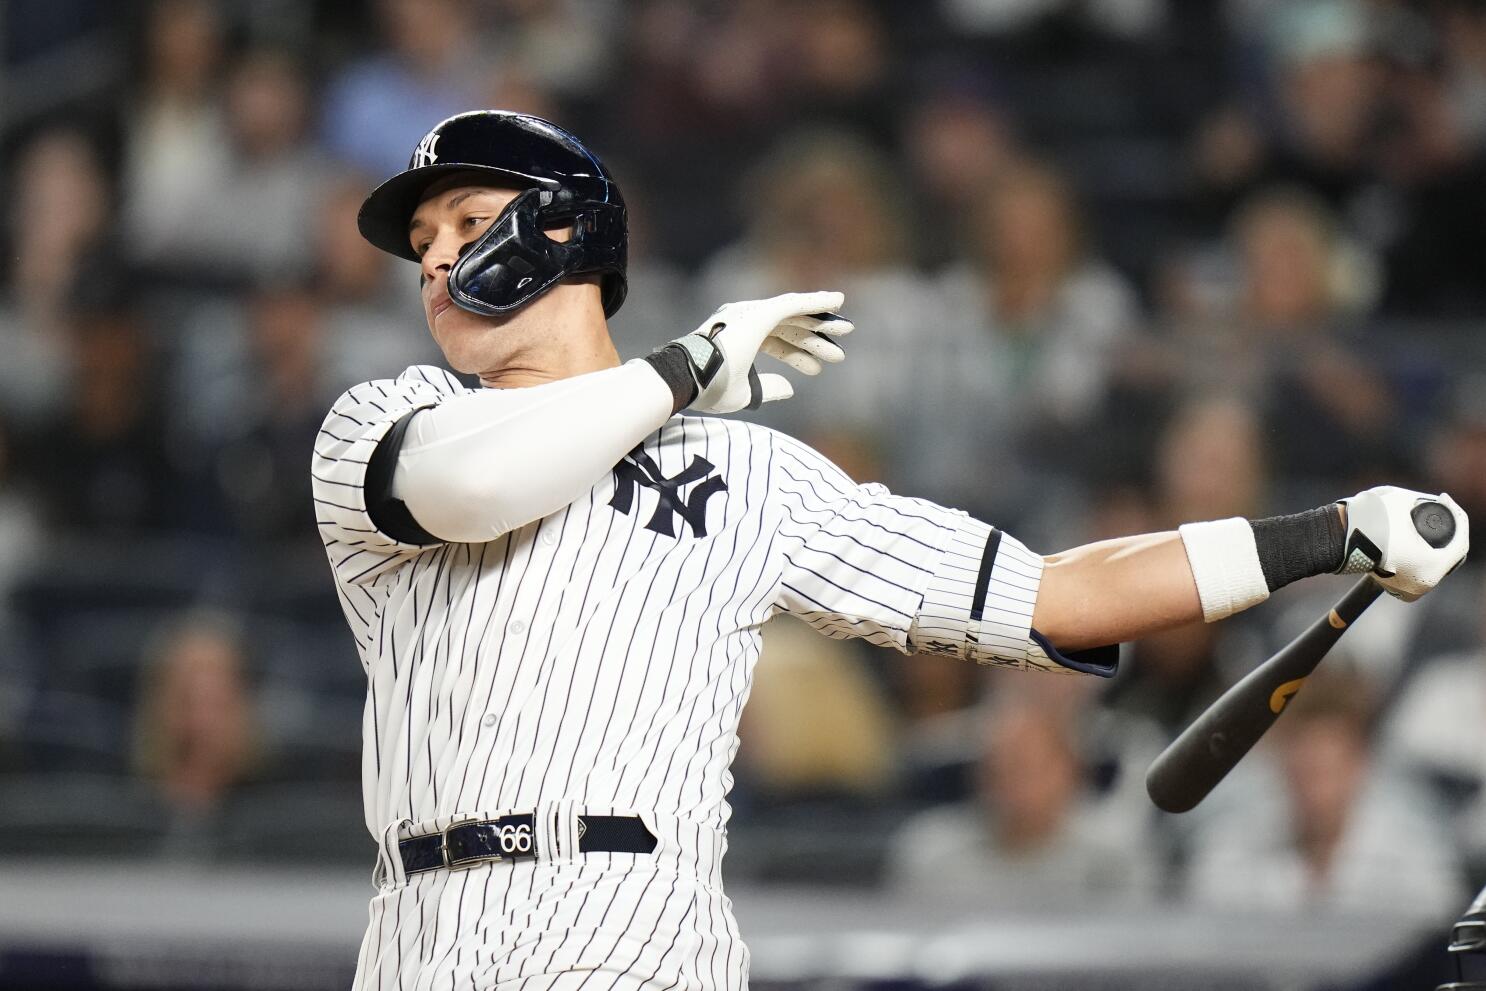 Isiah Kiner-Falefa lands in Yankees record books with historic